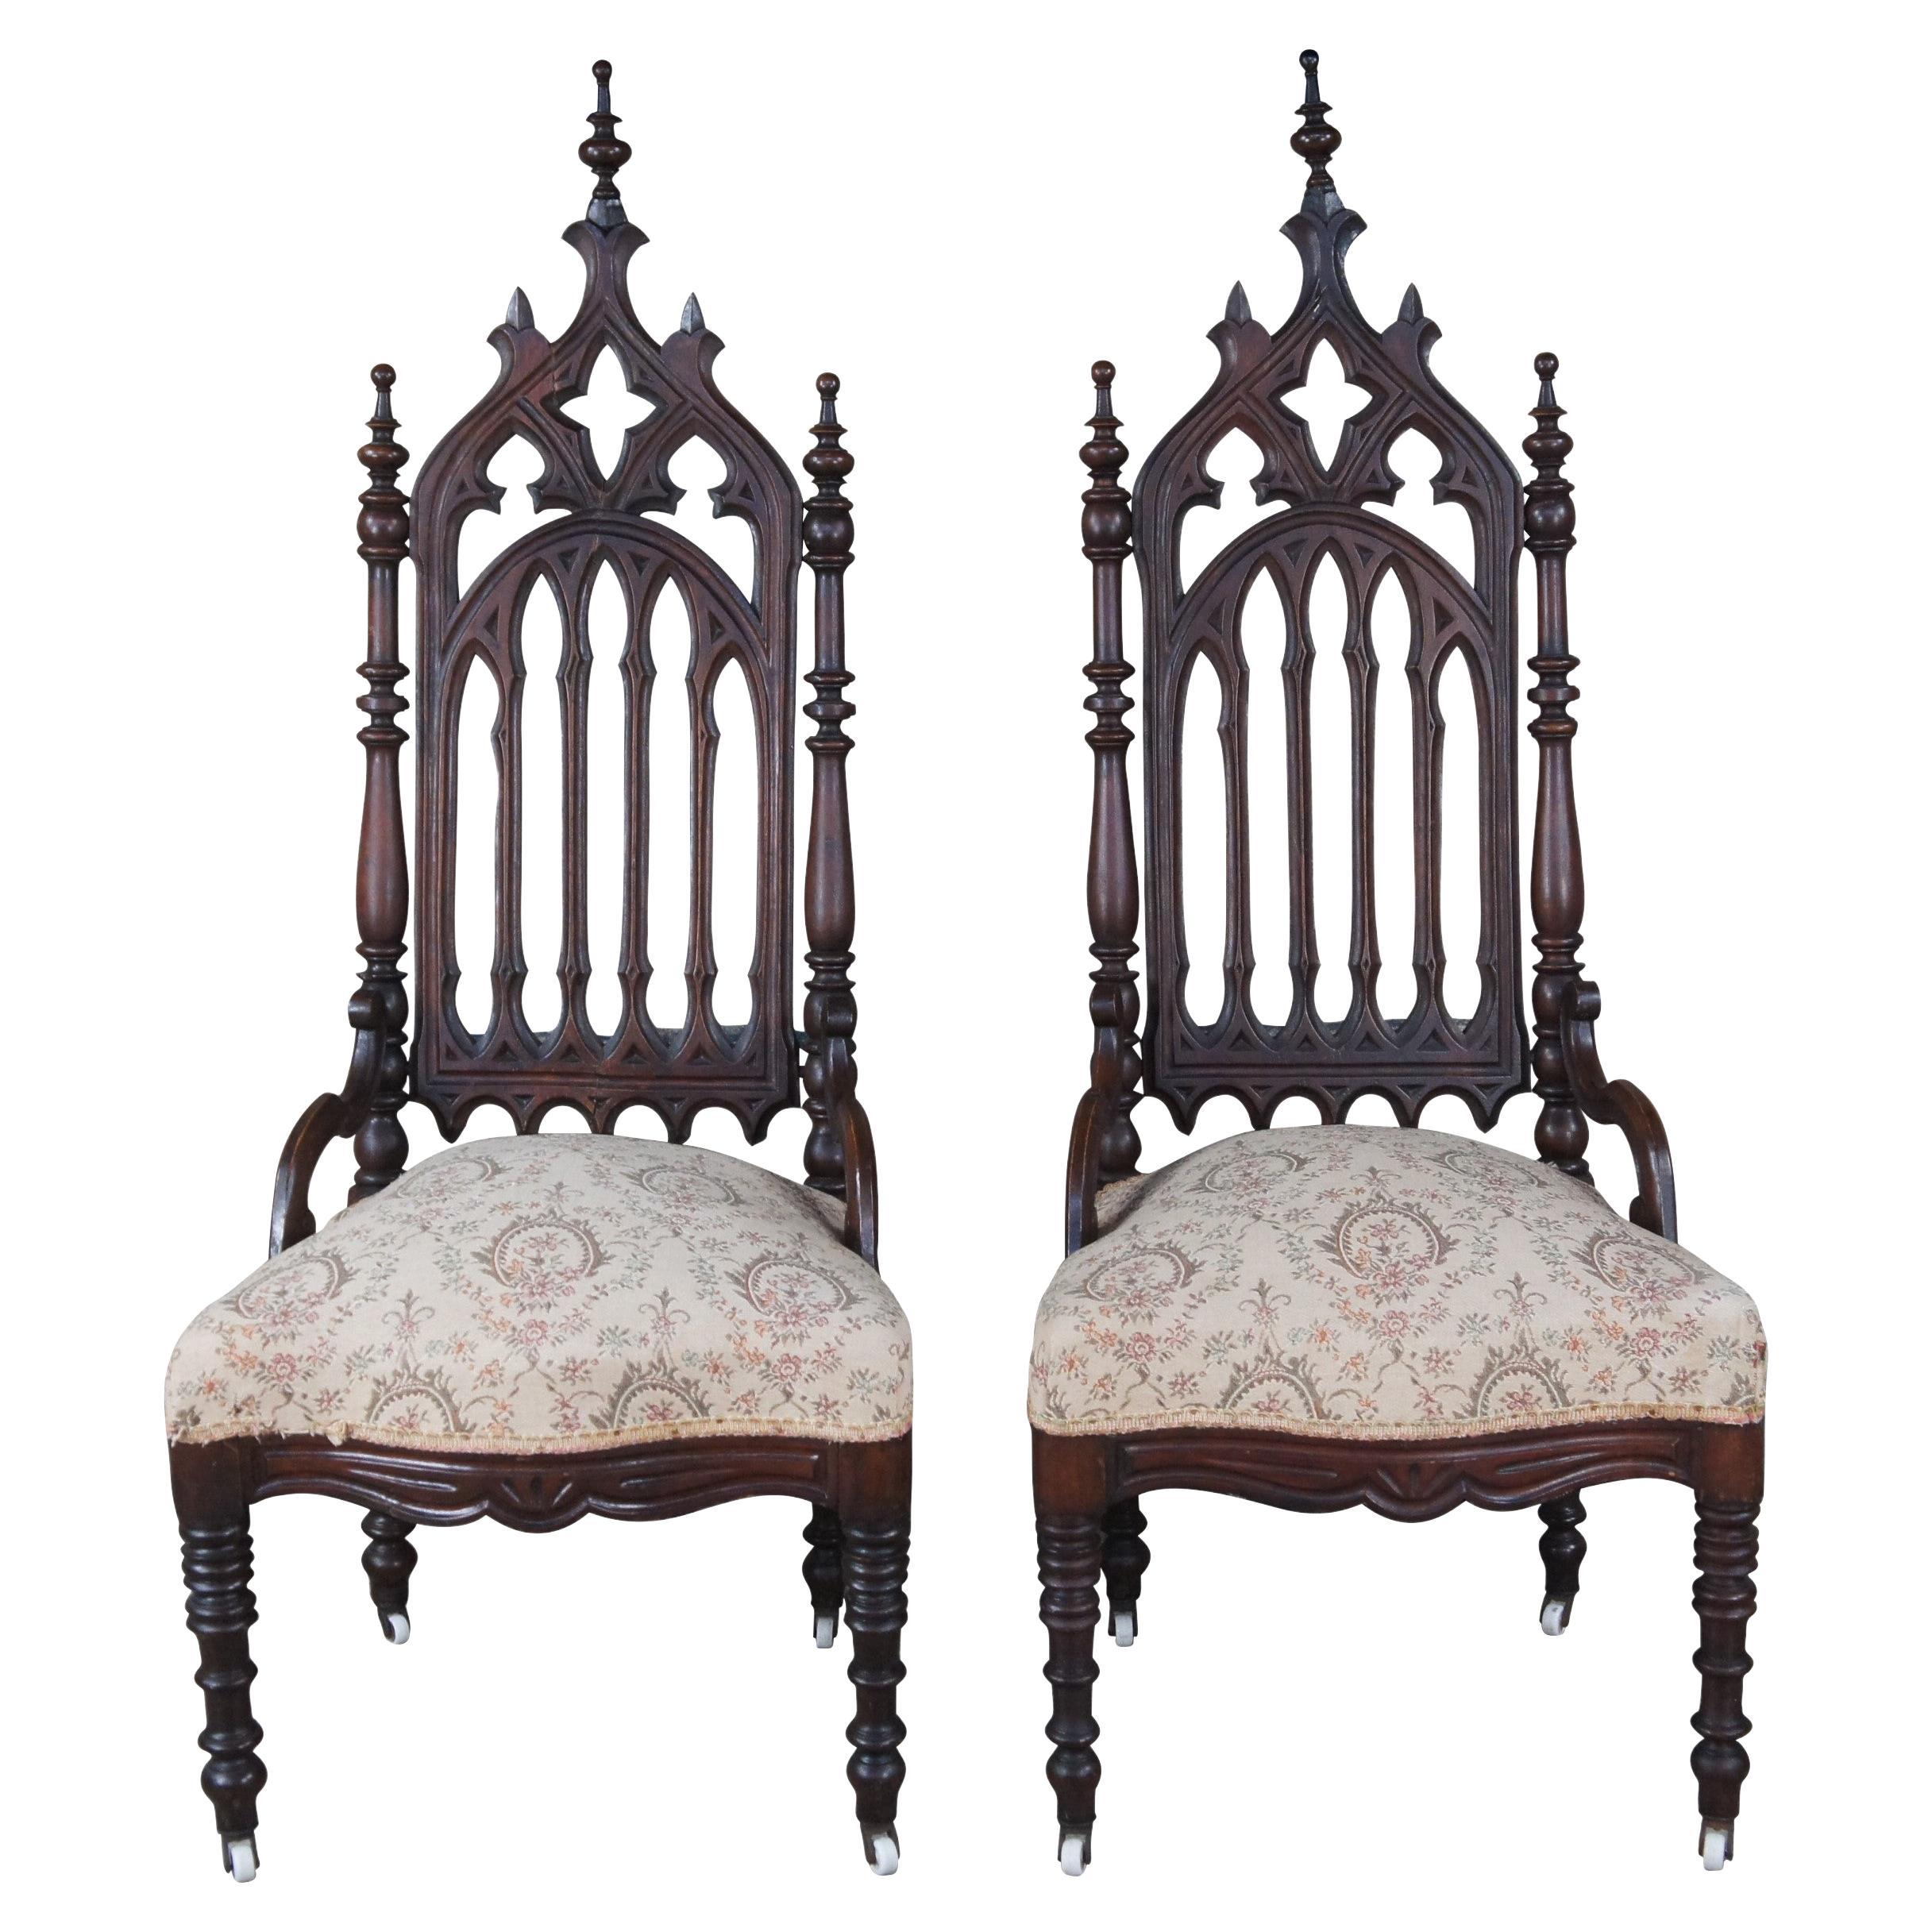 2 Antique Renaissance Gothic Revival Carved Mahogany Throne Dining Chairs